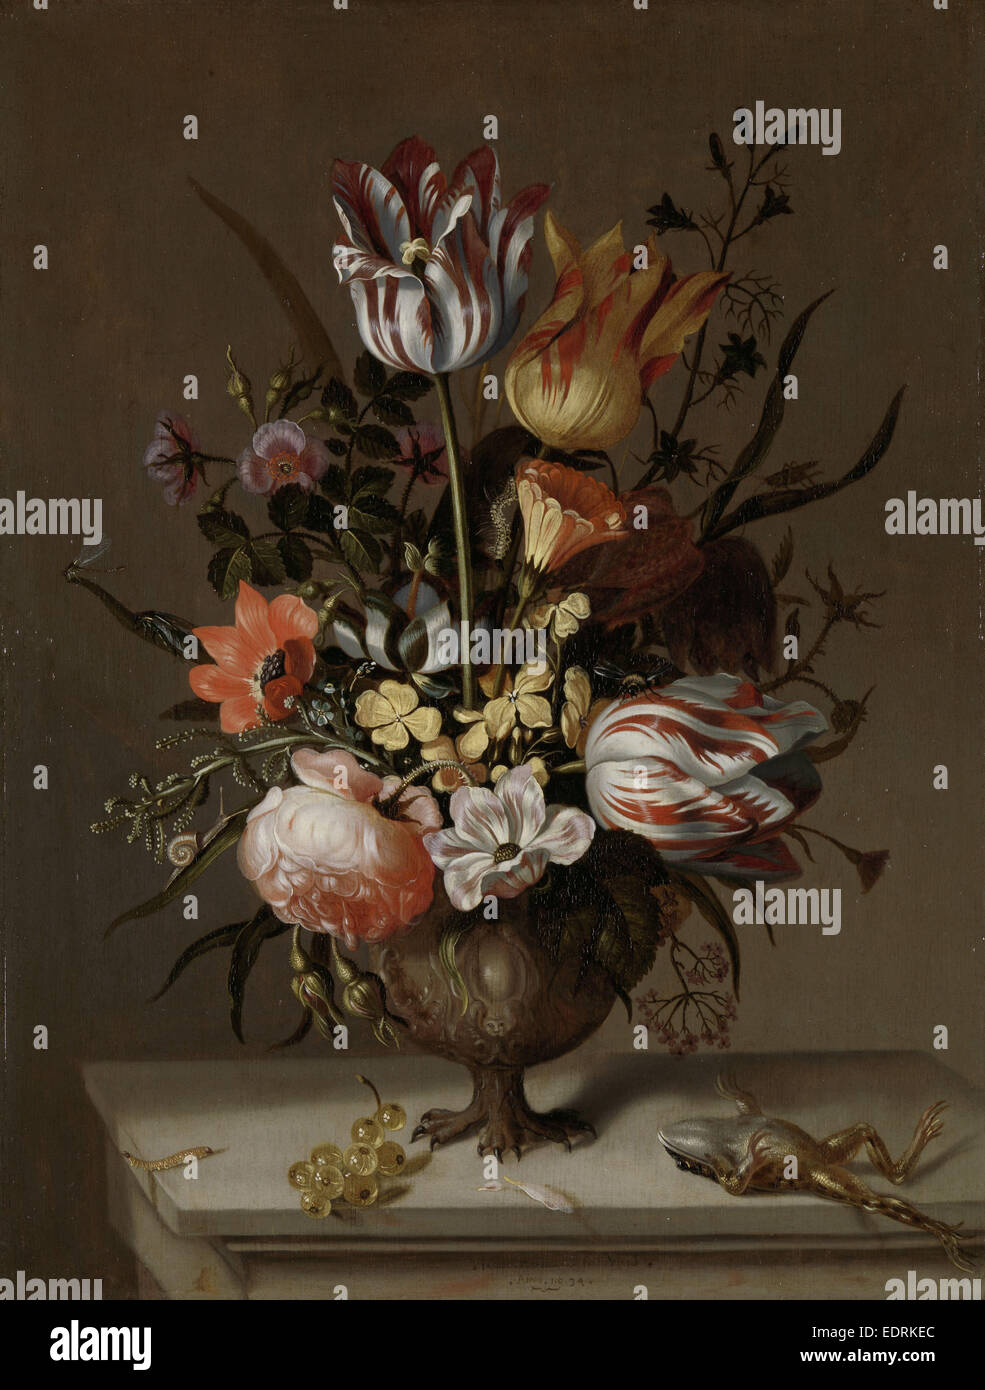 Still Life with a Vase of Flowers and a Dead Frog, Jacob Marrel, 1634 Stock Photo